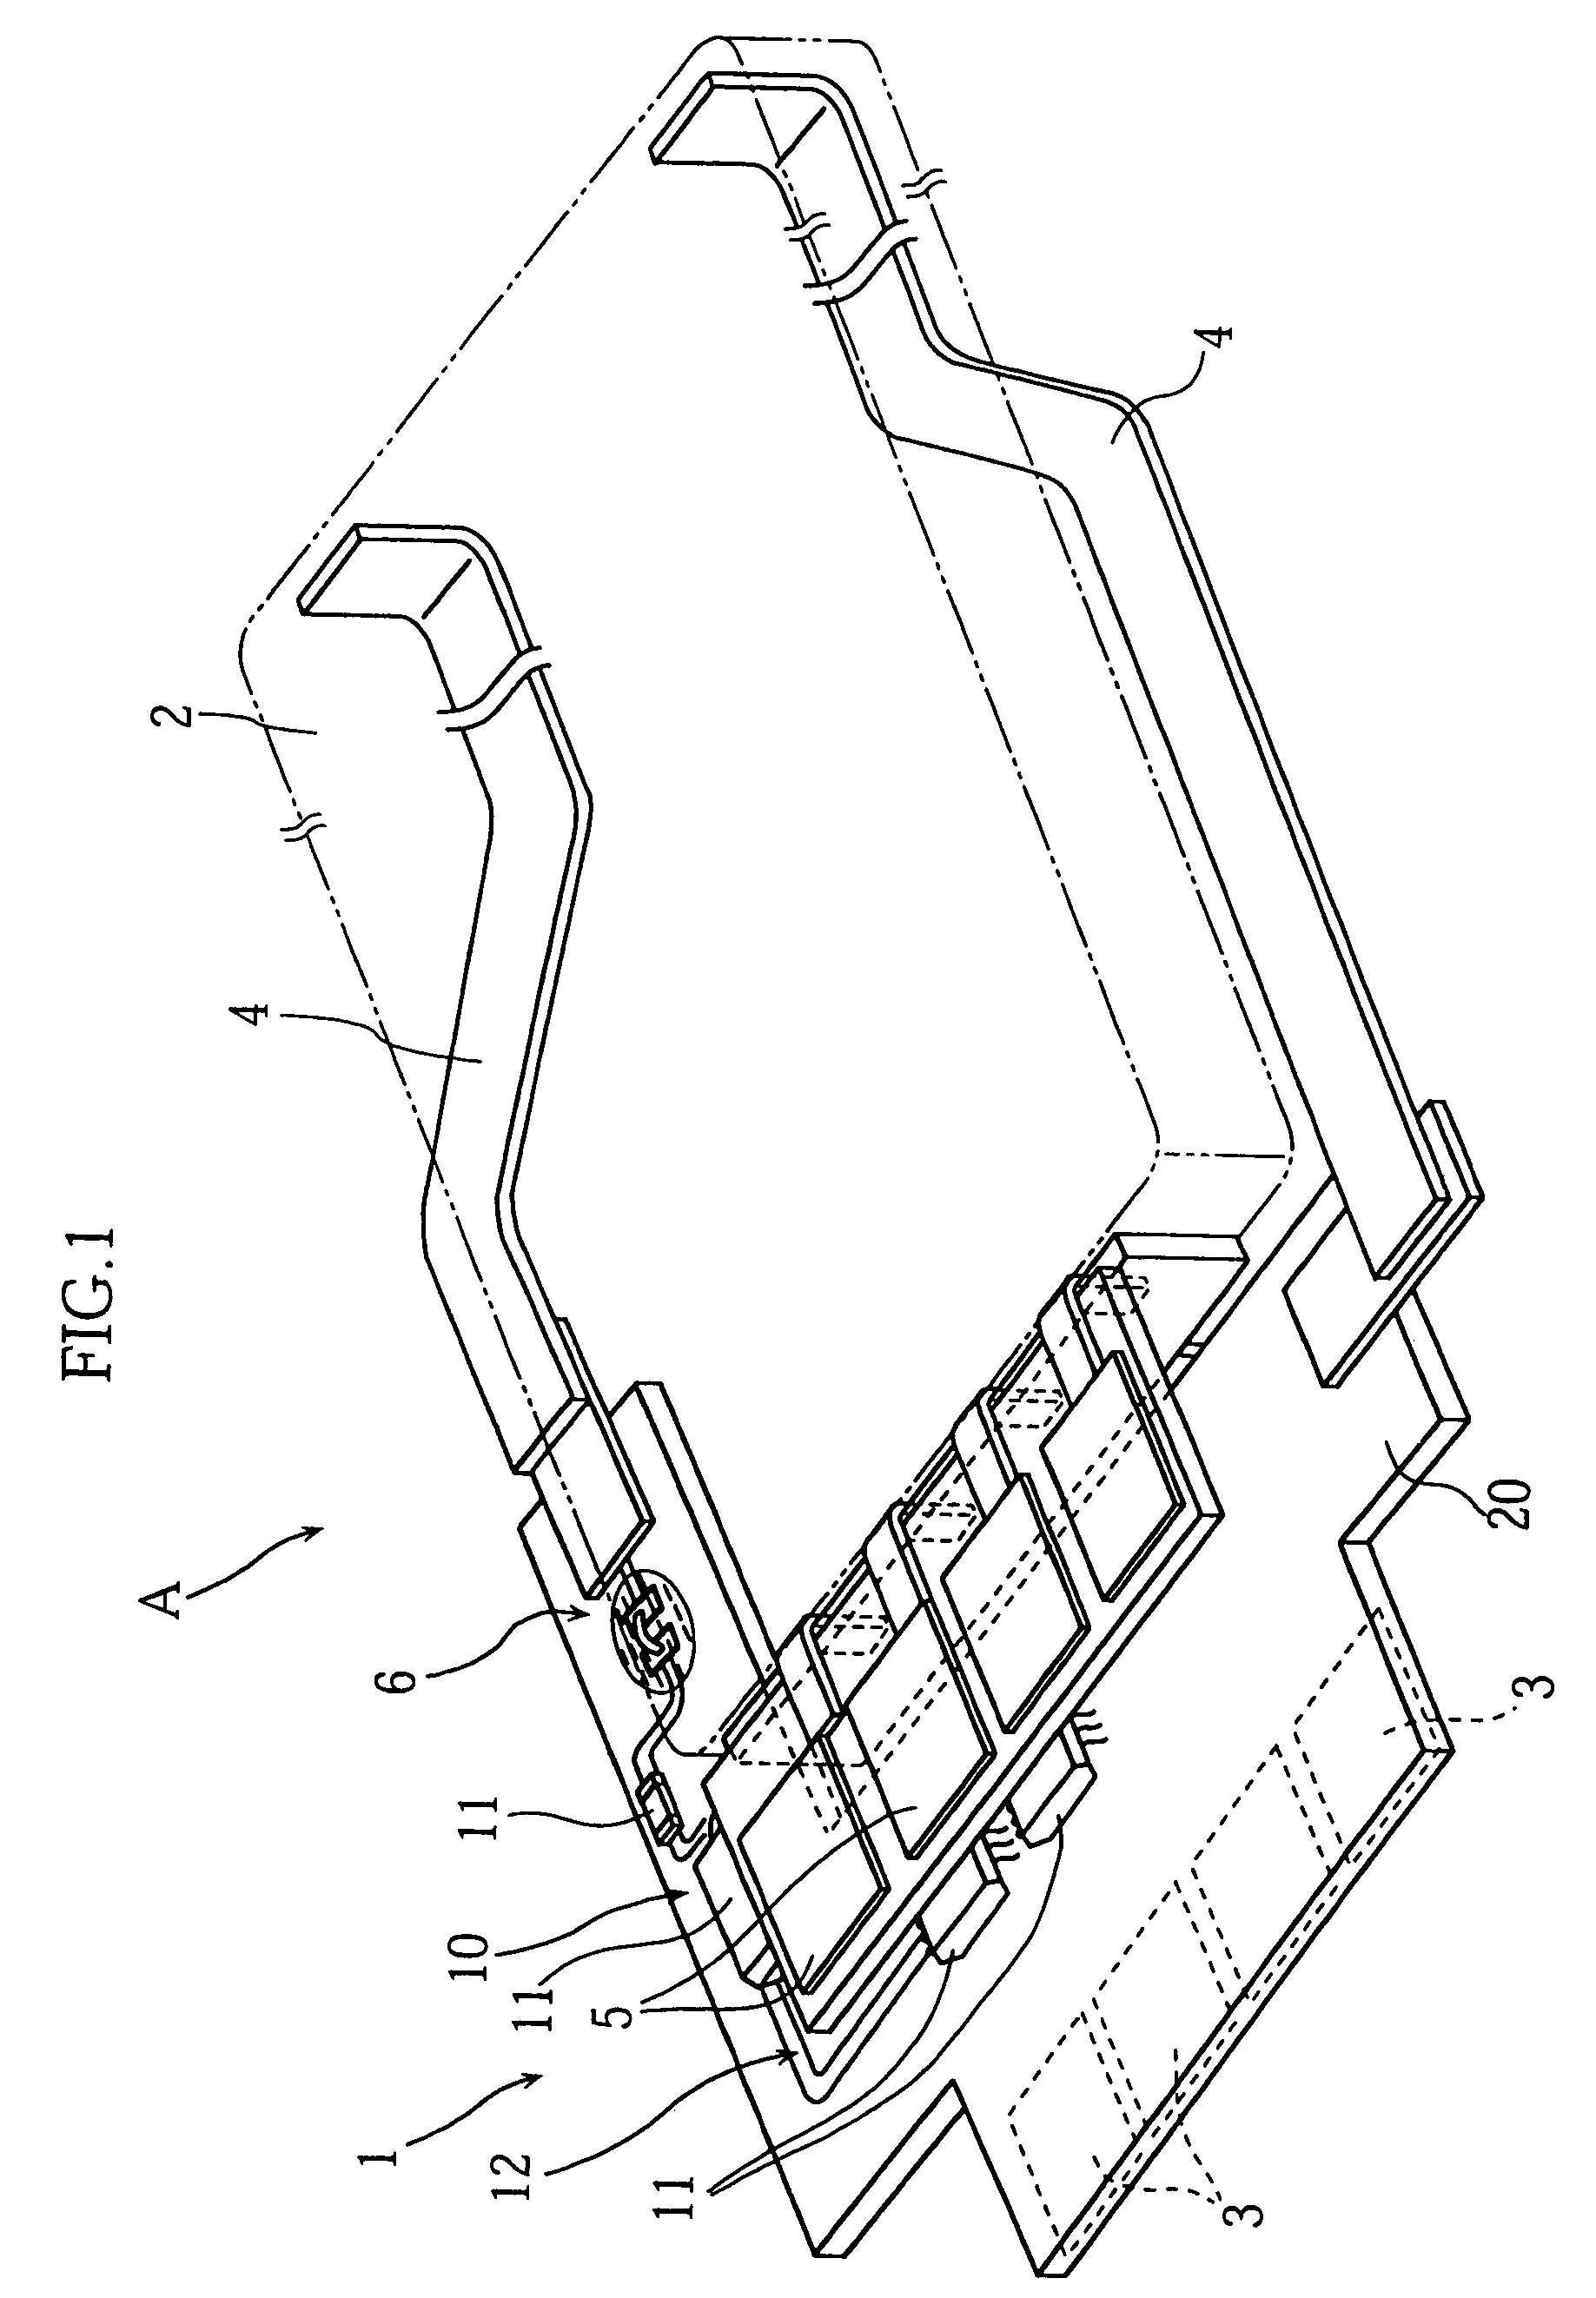 Printed-circuit board with fuse